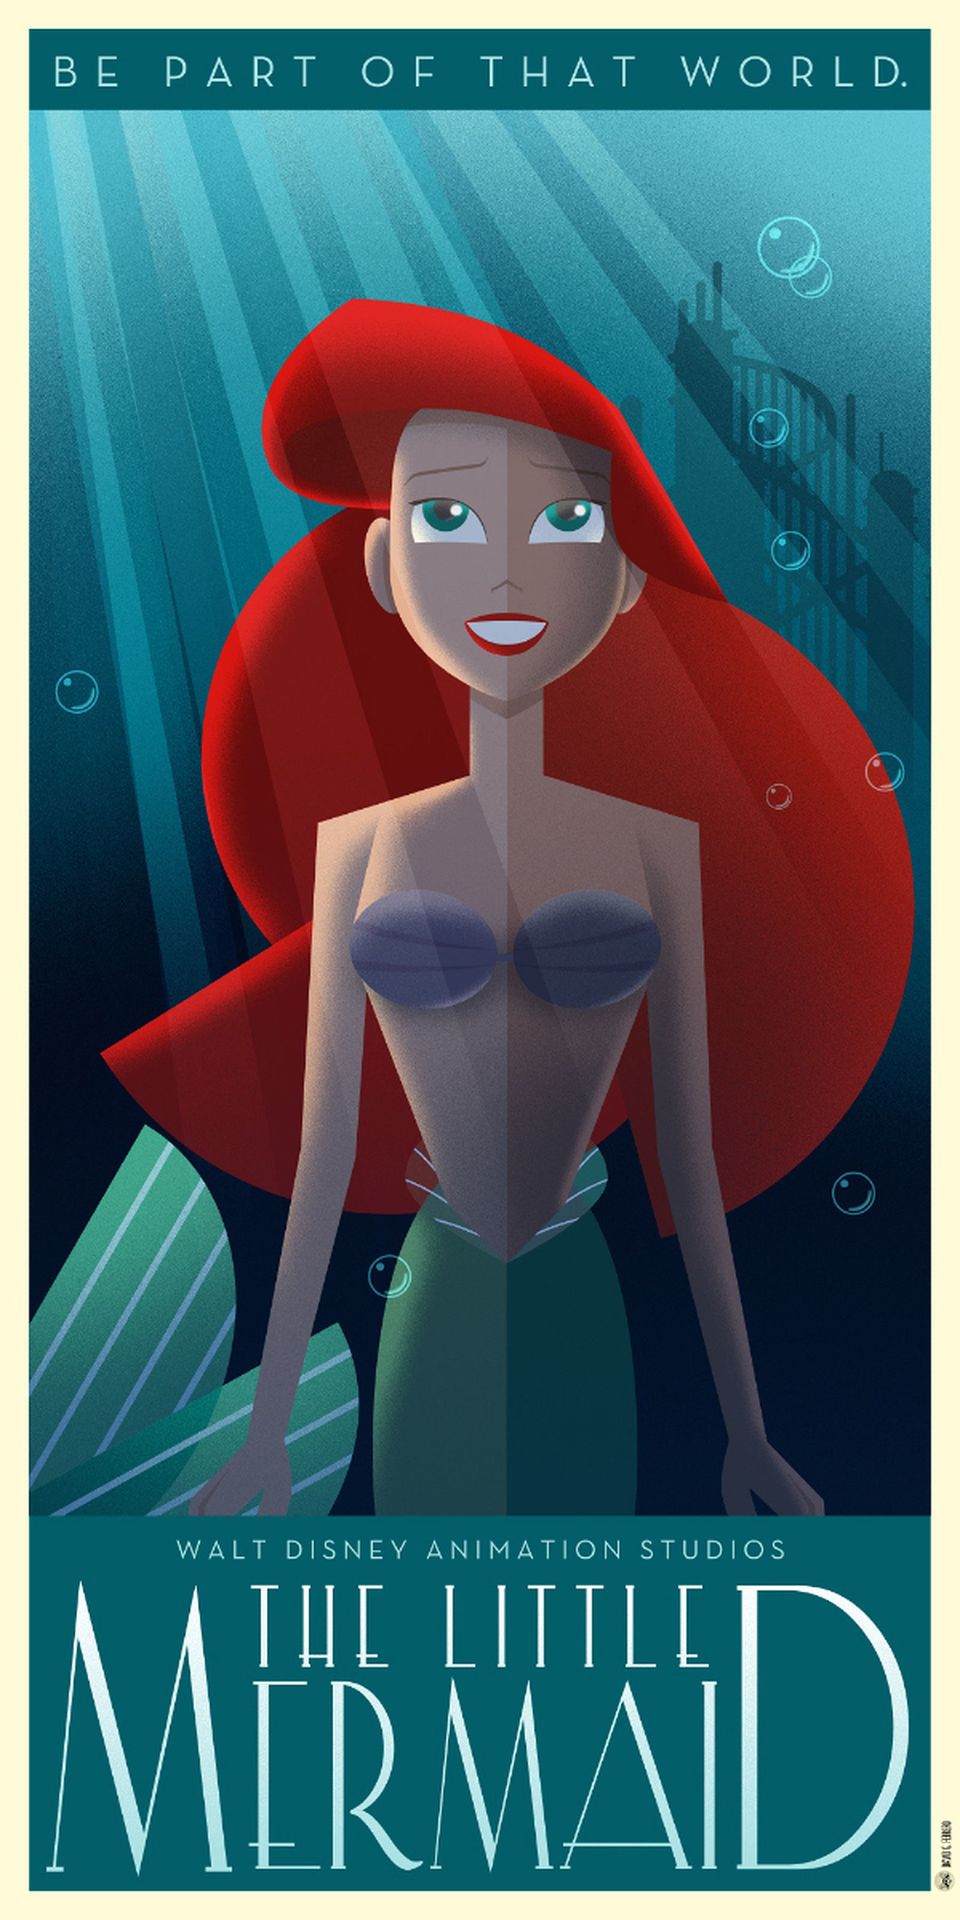 these-12-amazing-art-deco-disney-posters-bring-a-whole-new-world-of-20s-glamour-624665